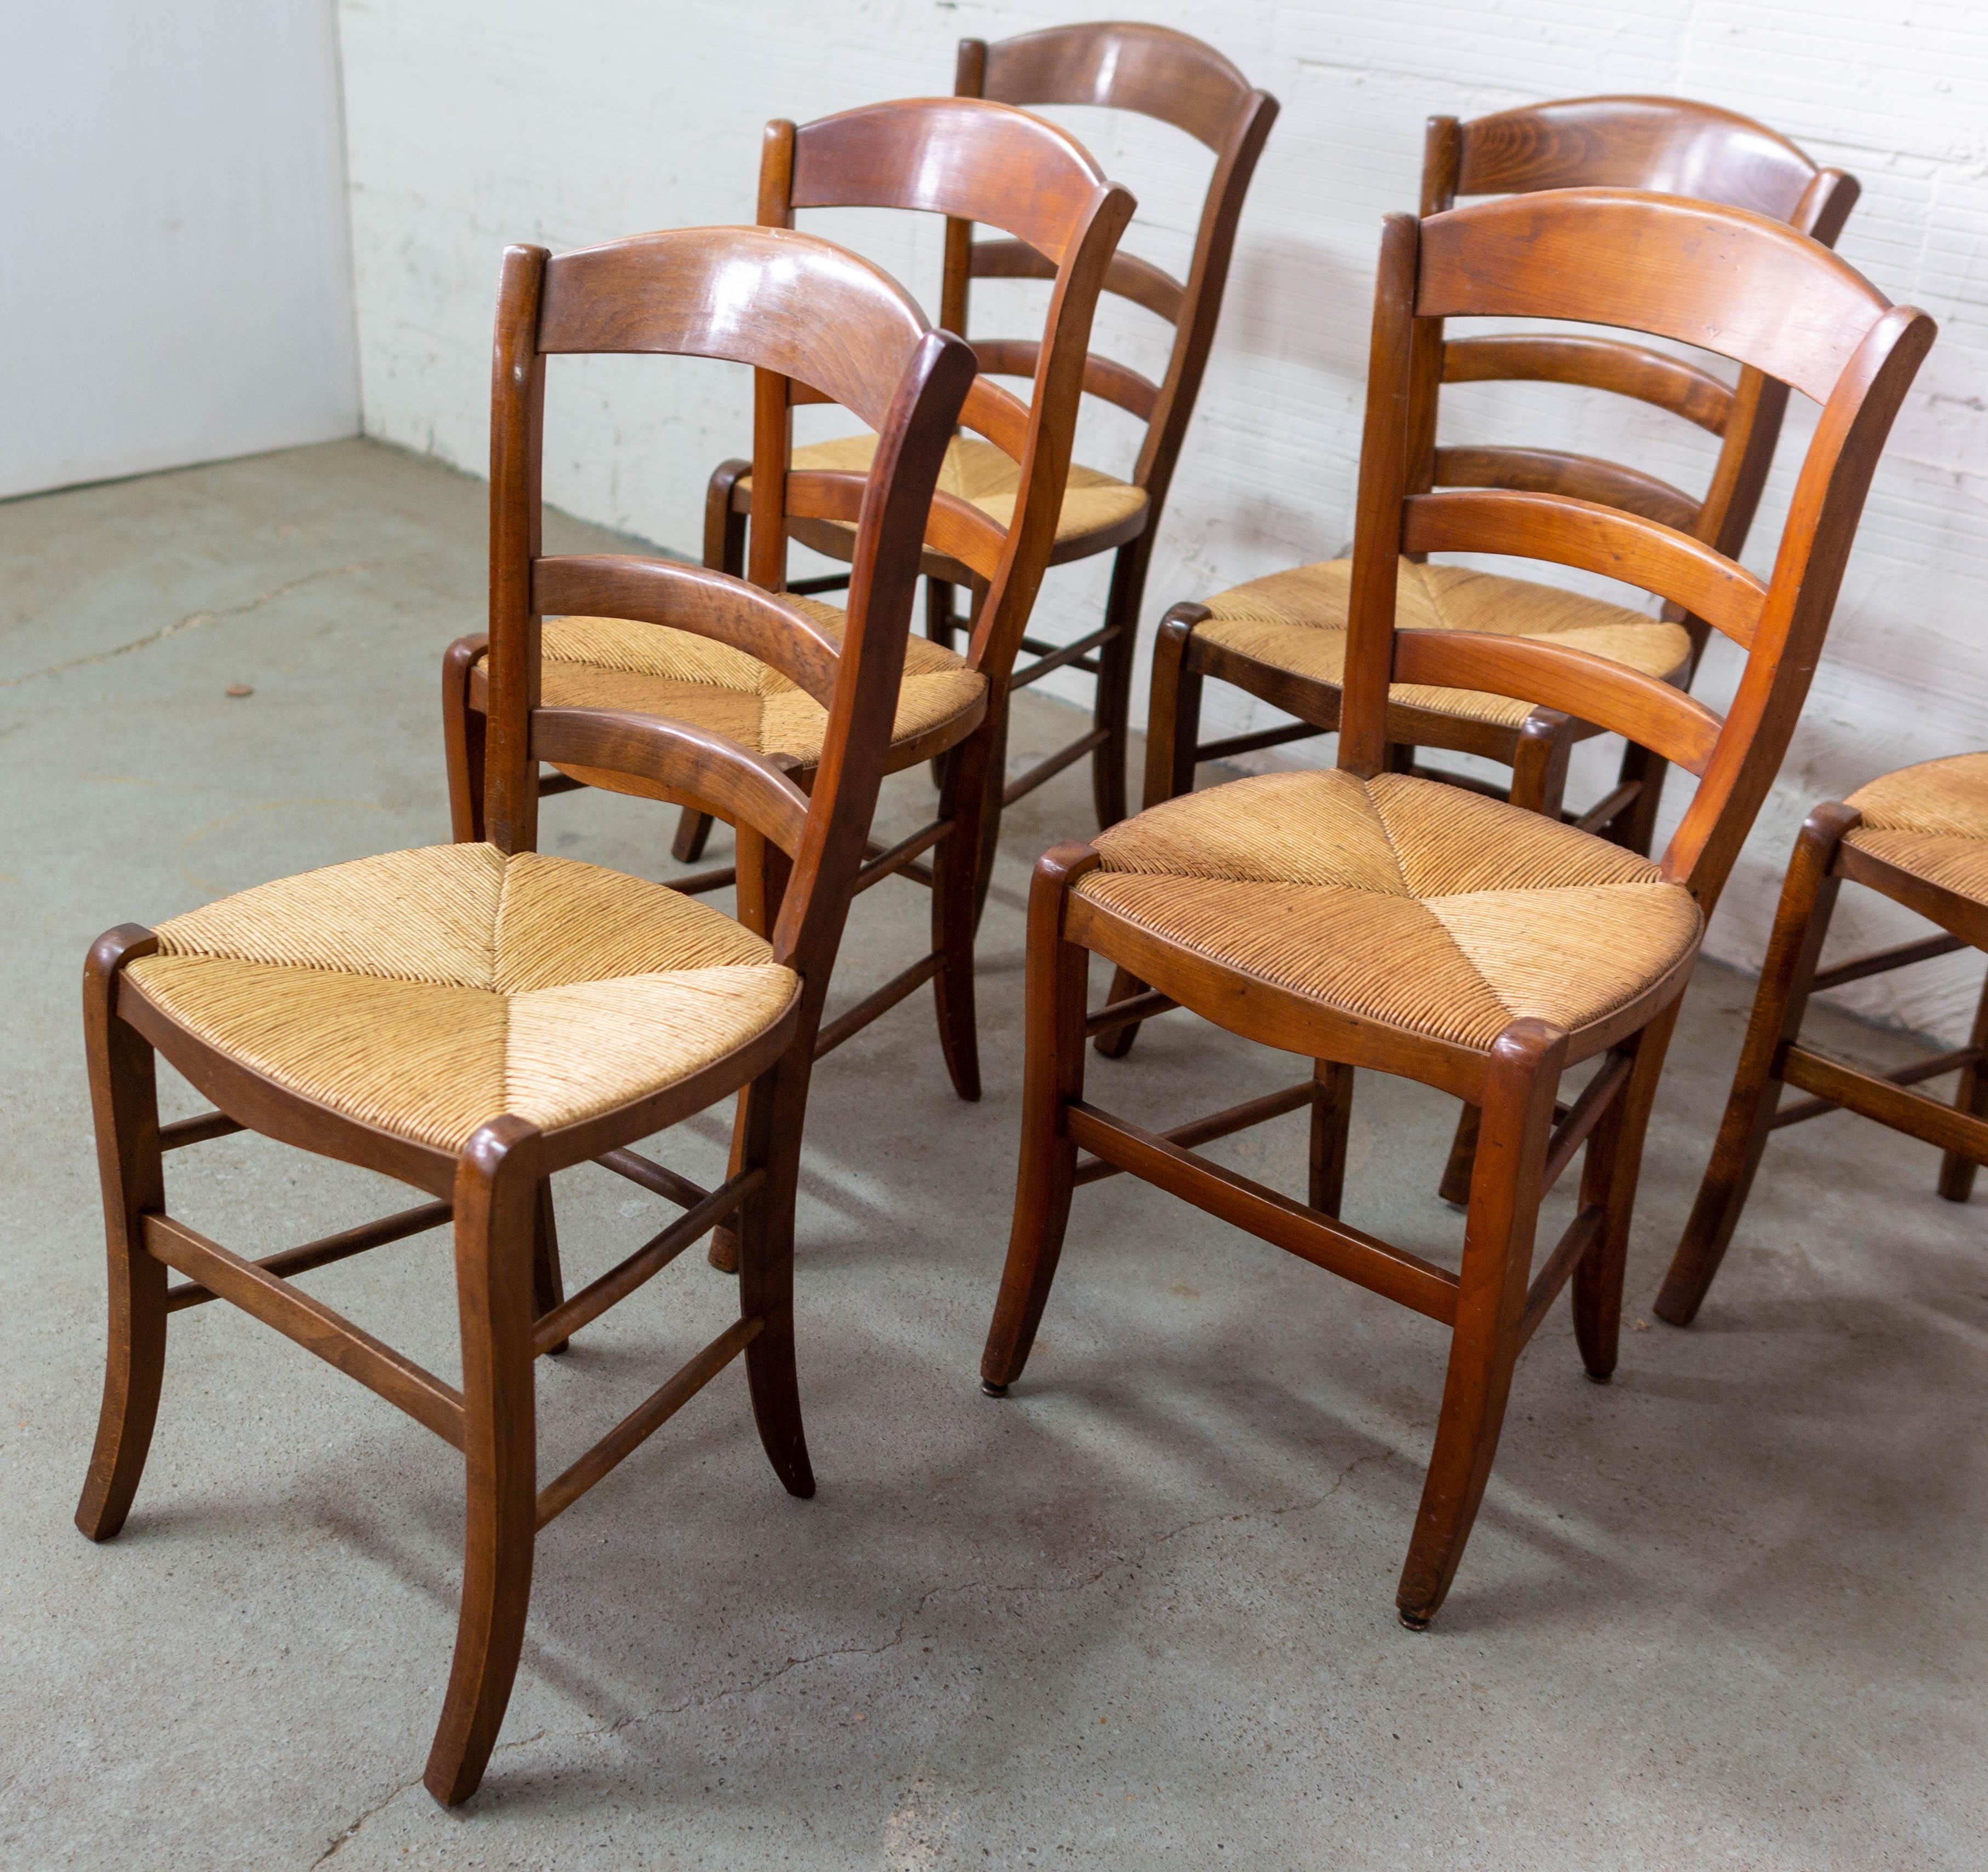 Six dining chairs French Country House ladder backs with rush seats
Two chairs are of cherrywood, four are beech (see photos)
In very good condition with only minor signs of use, sound and solid.

Shipping:
3 packs:
L 41/ P 47/ H 89 cm, 8 kg